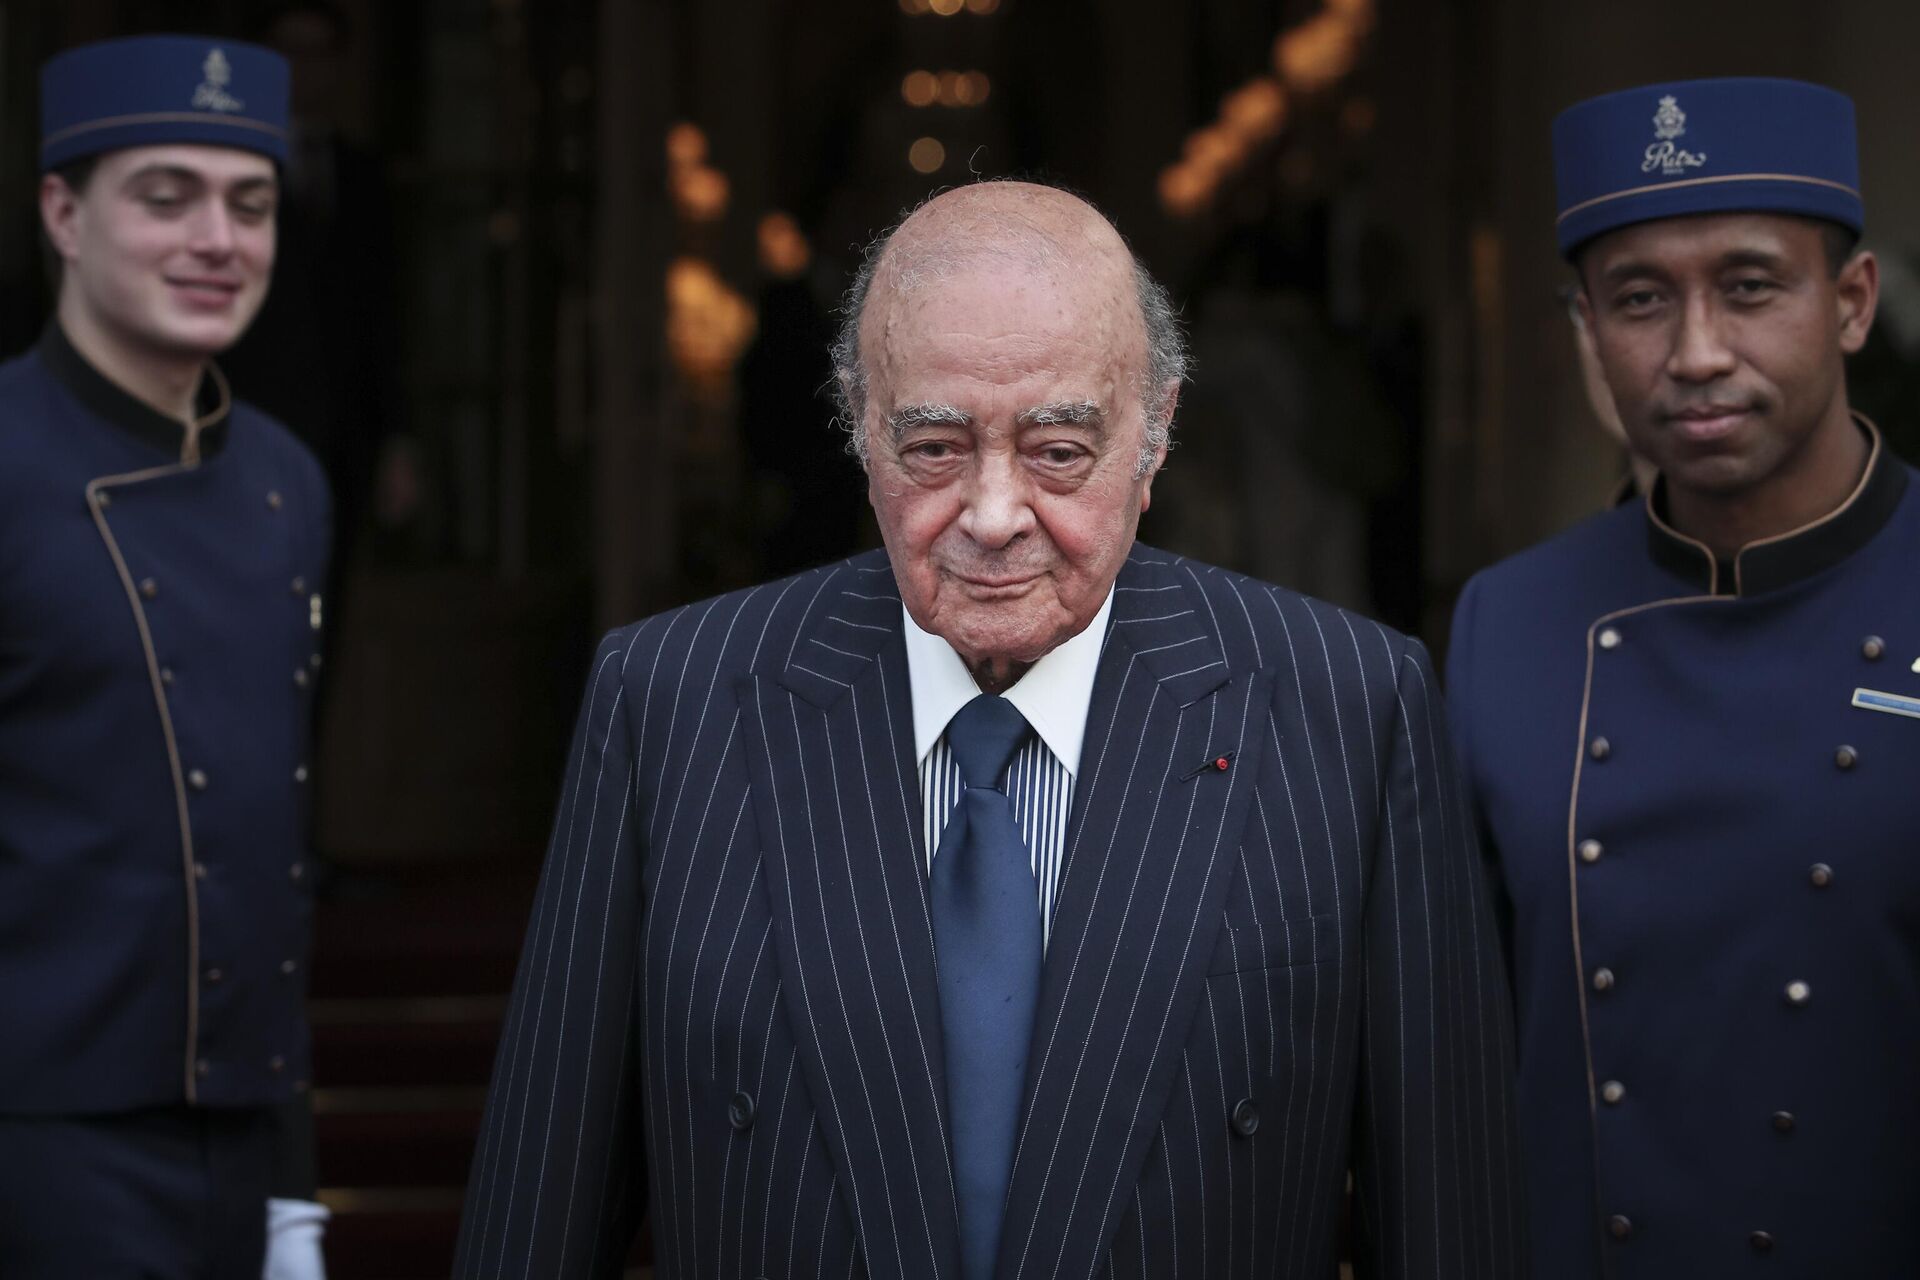 Egyptian businessman and Ritz hotel owner Mohamed Al Fayed poses with his hotel staff in Paris, June 27, 2016. Al Fayed, the former Harrods owner whose son Dodi was killed in a car crash with Princess Diana, has died at age 94. His death was announced Friday, Sept. 1, 2023, by Fulham Football Club, which Al Fayed once owned.  - Sputnik Africa, 1920, 24.12.2023